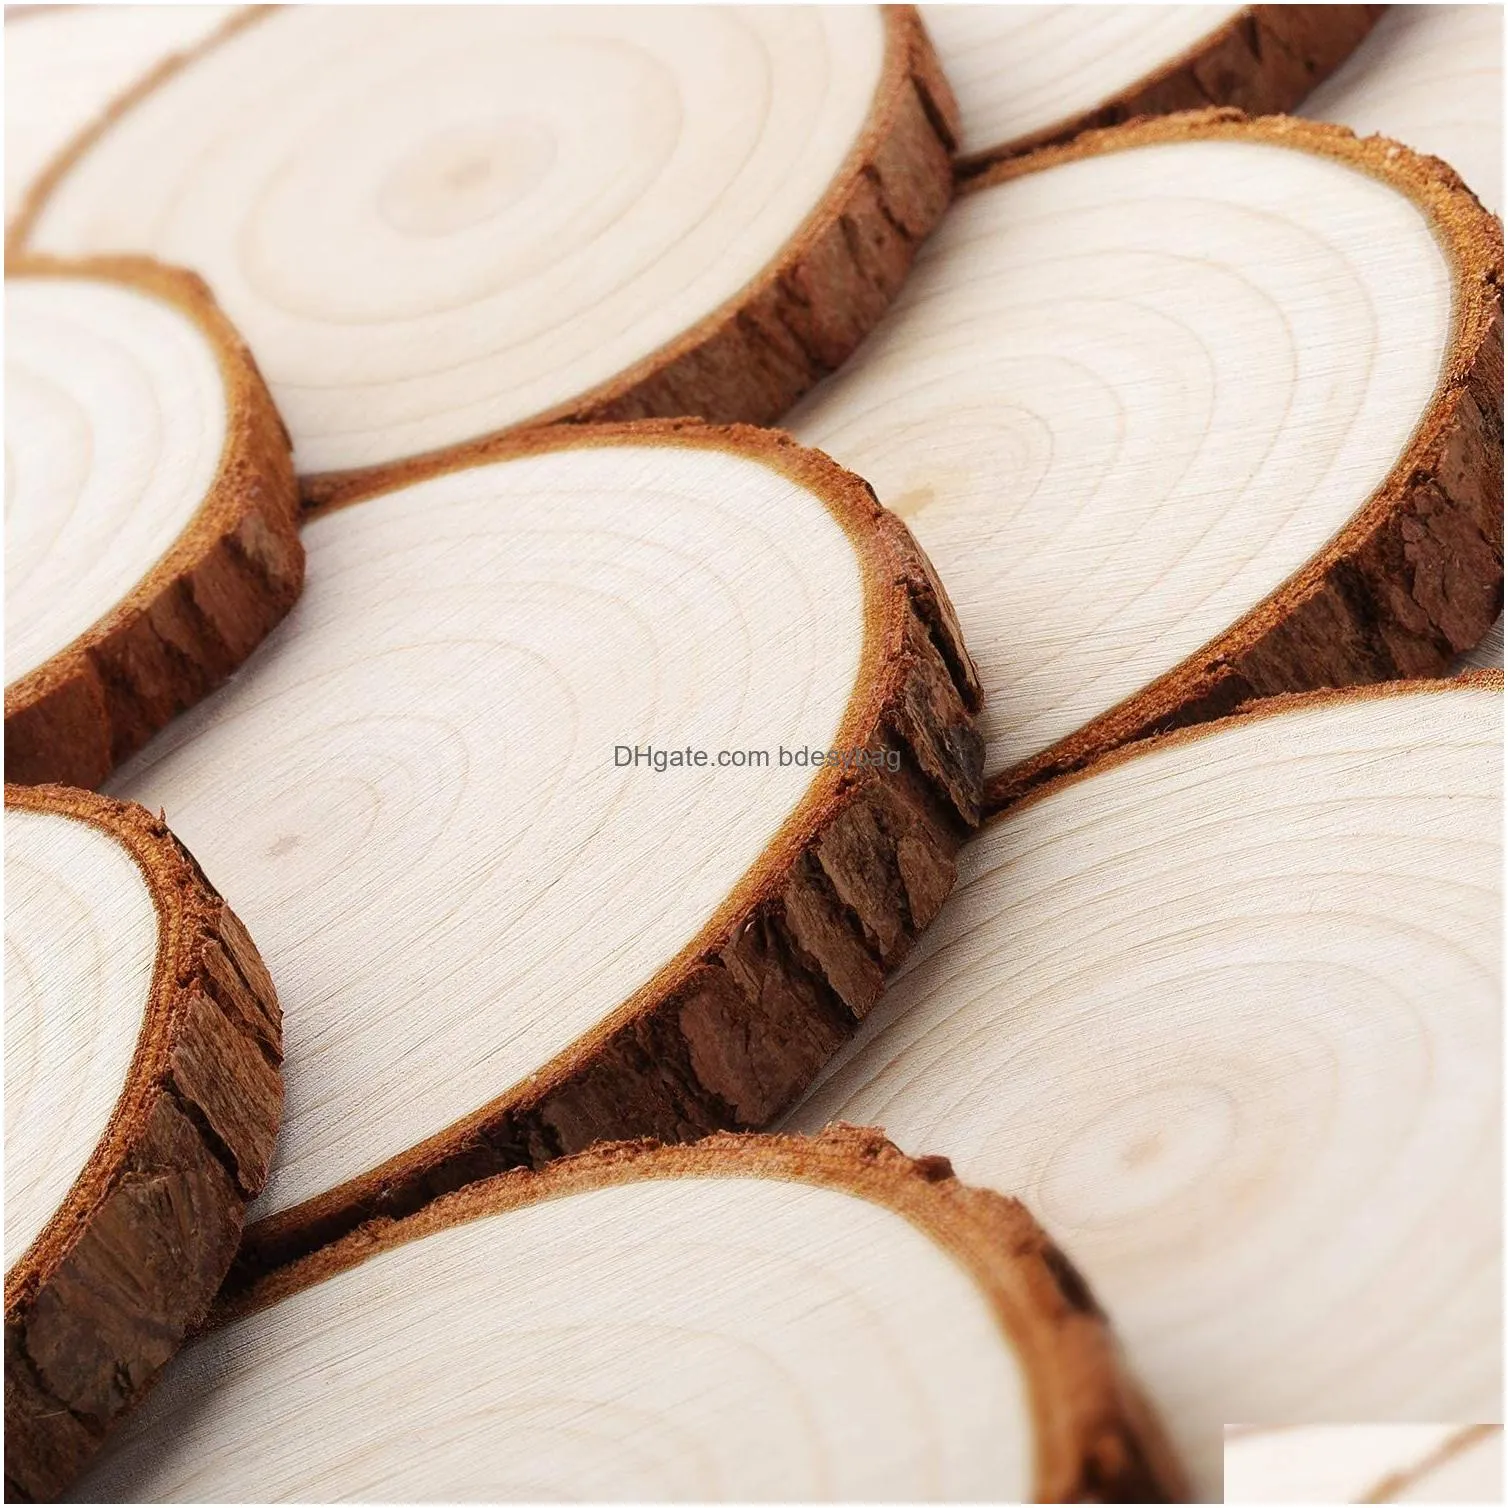 Natural Wood Slices Unfinished Wood Craft Kit 14 inch Undrilled Wooden Circles Without Hole Tree Slice with Bark for Arts Painting Christmas Ornaments DIY